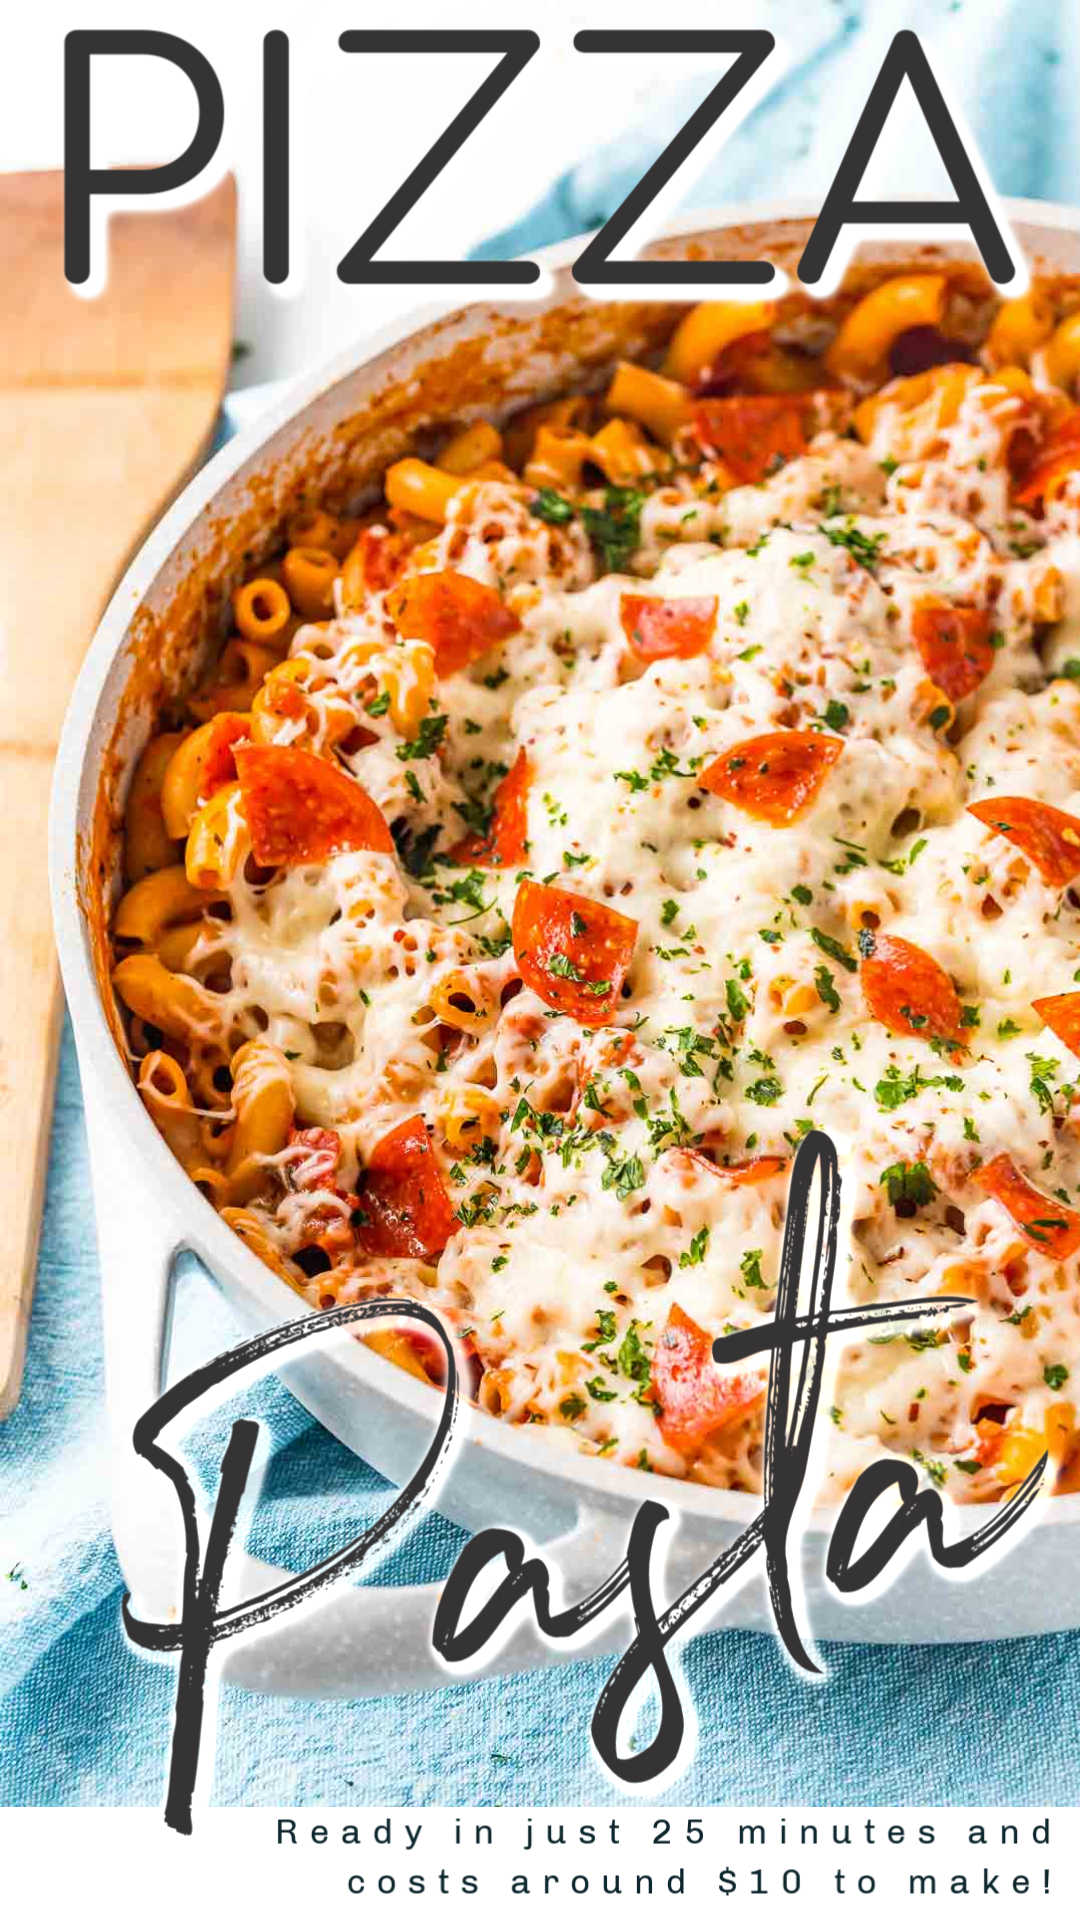 This One Pan Pizza Pasta is what weeknight dreams are made of! Pizza and pasta come together in an easy meal loaded with flavor that’s ready in less than 30 minutes and made in one pot!!!

It’s made with large elbow macaroni, pizza sauce, marinara sauce, mozzarella, pepperoni, and spices! And it only costs around $10 to make!!! via @sugarandsoulco